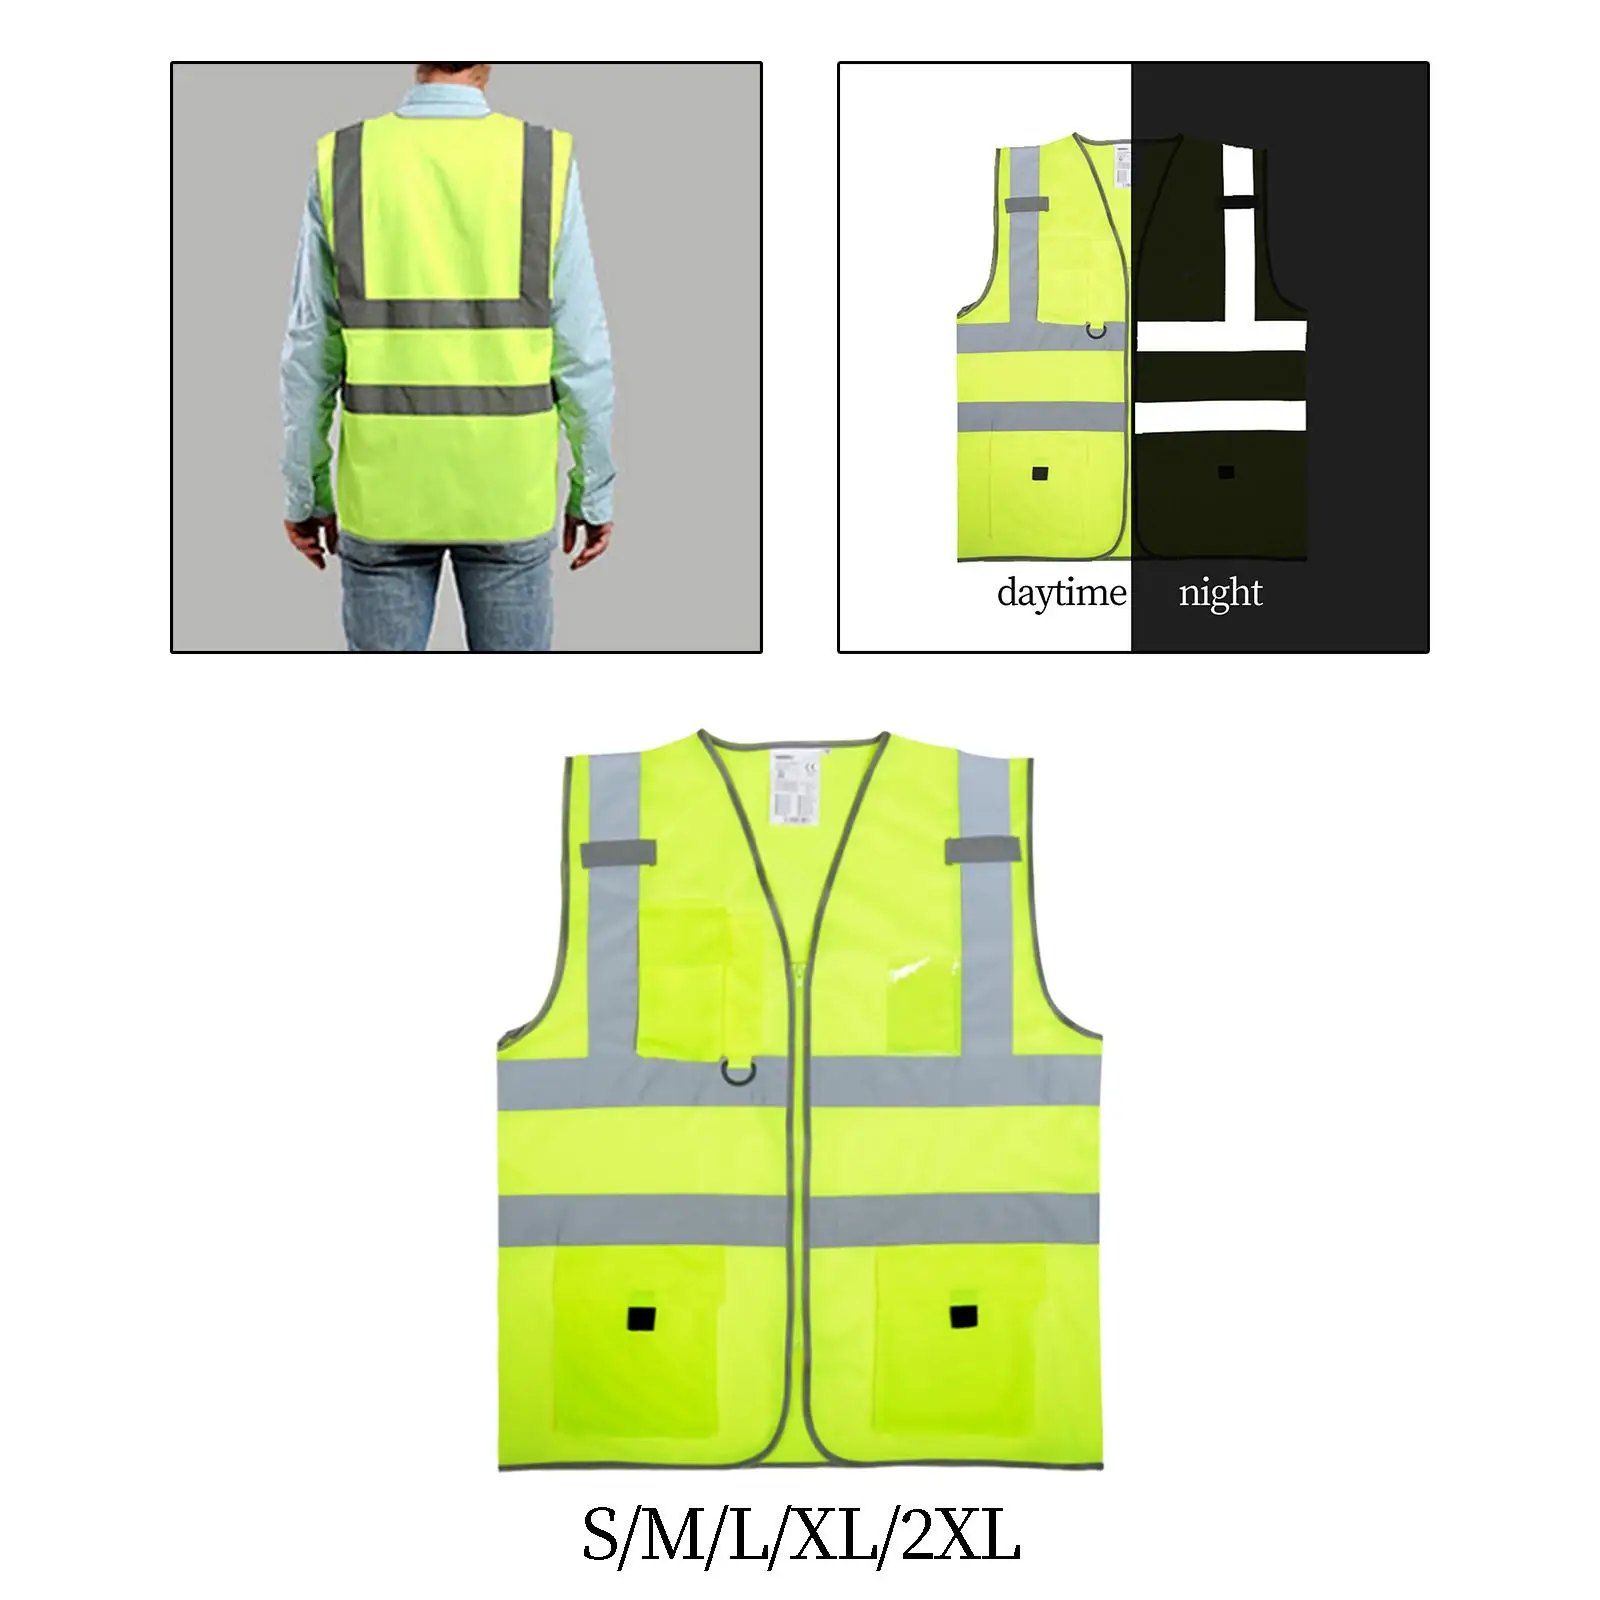 Reflective Vest Comfortable Highlight Construction Gear Construction Vest for Construction Racing Running Sports Airport Workers